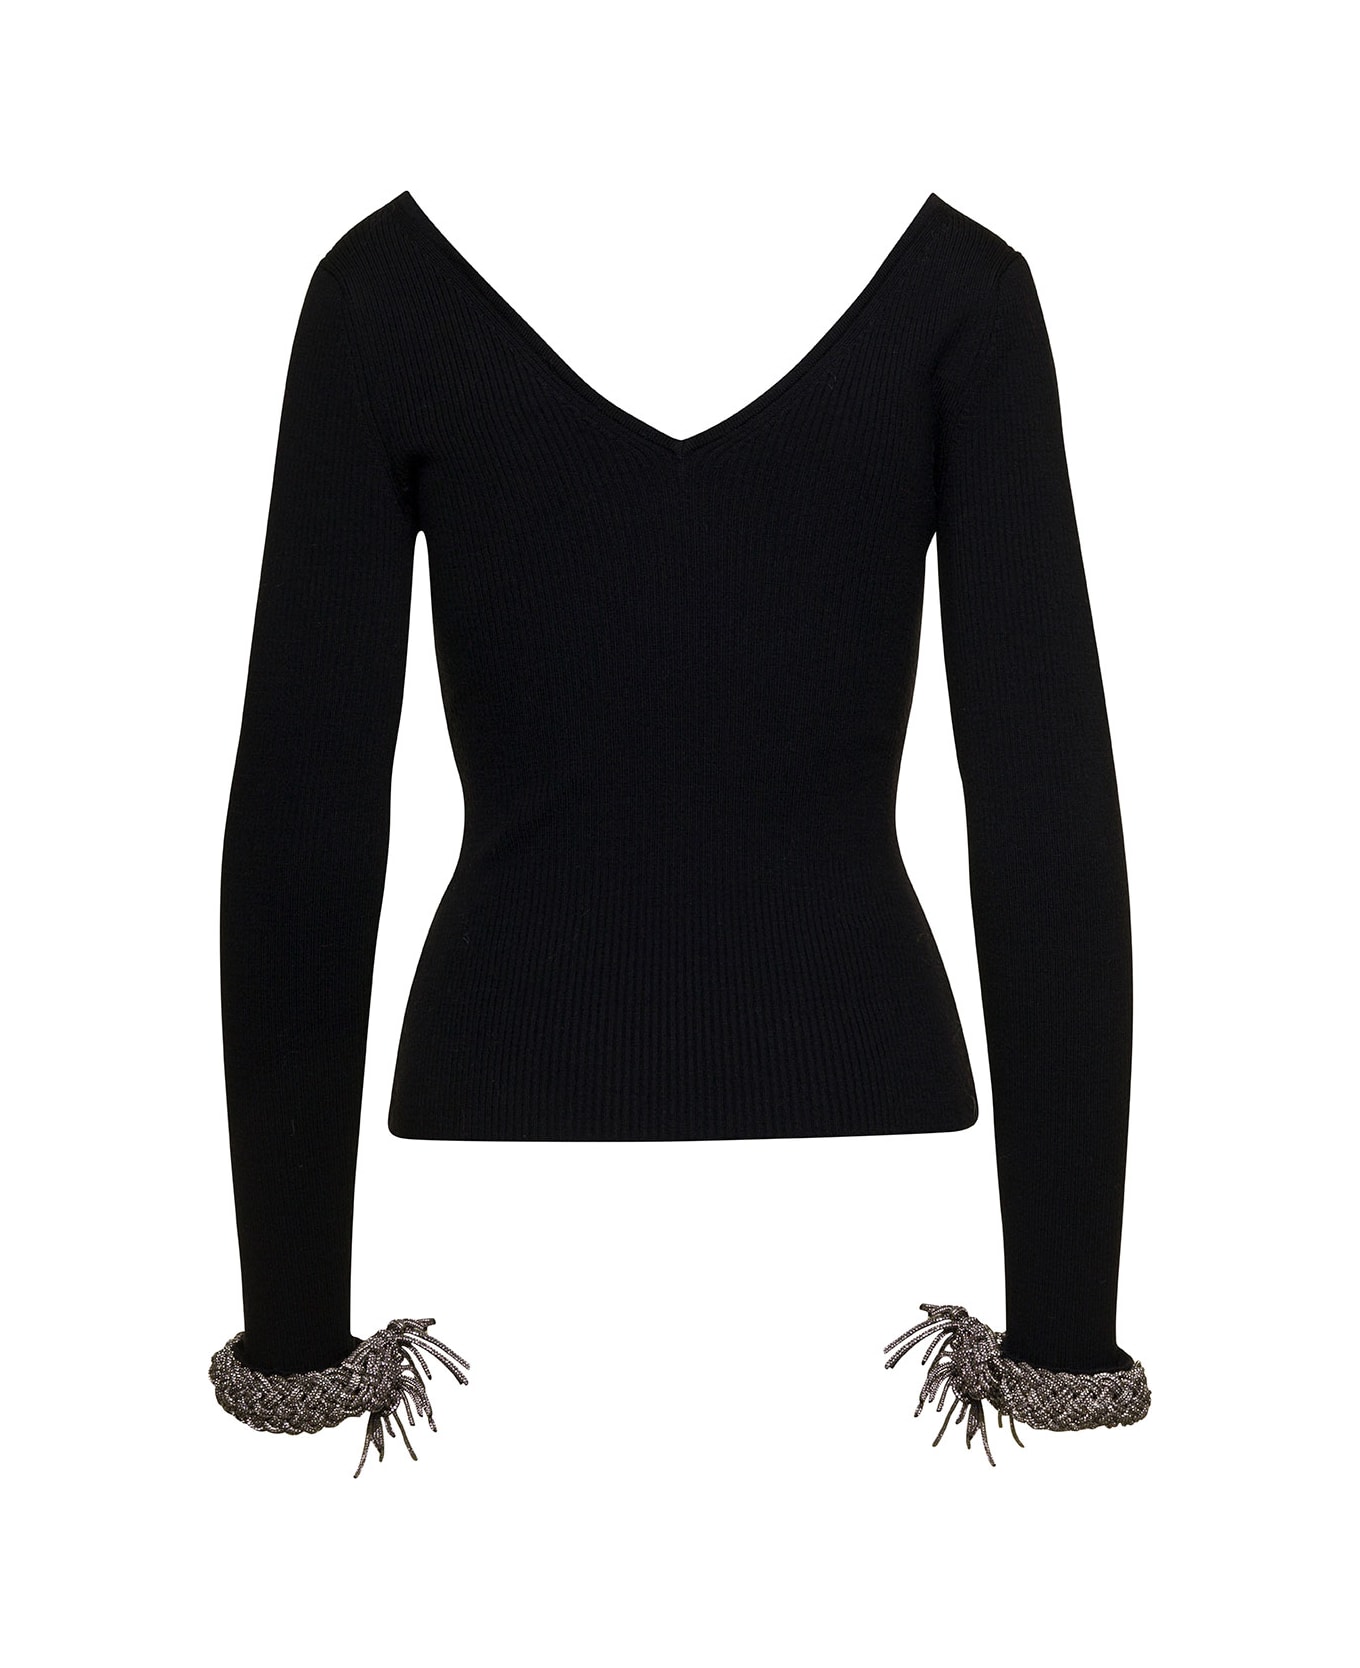 Giuseppe di Morabito Black Top With V Neckline And Embellished Wrist In Wool Blend Woman - Black